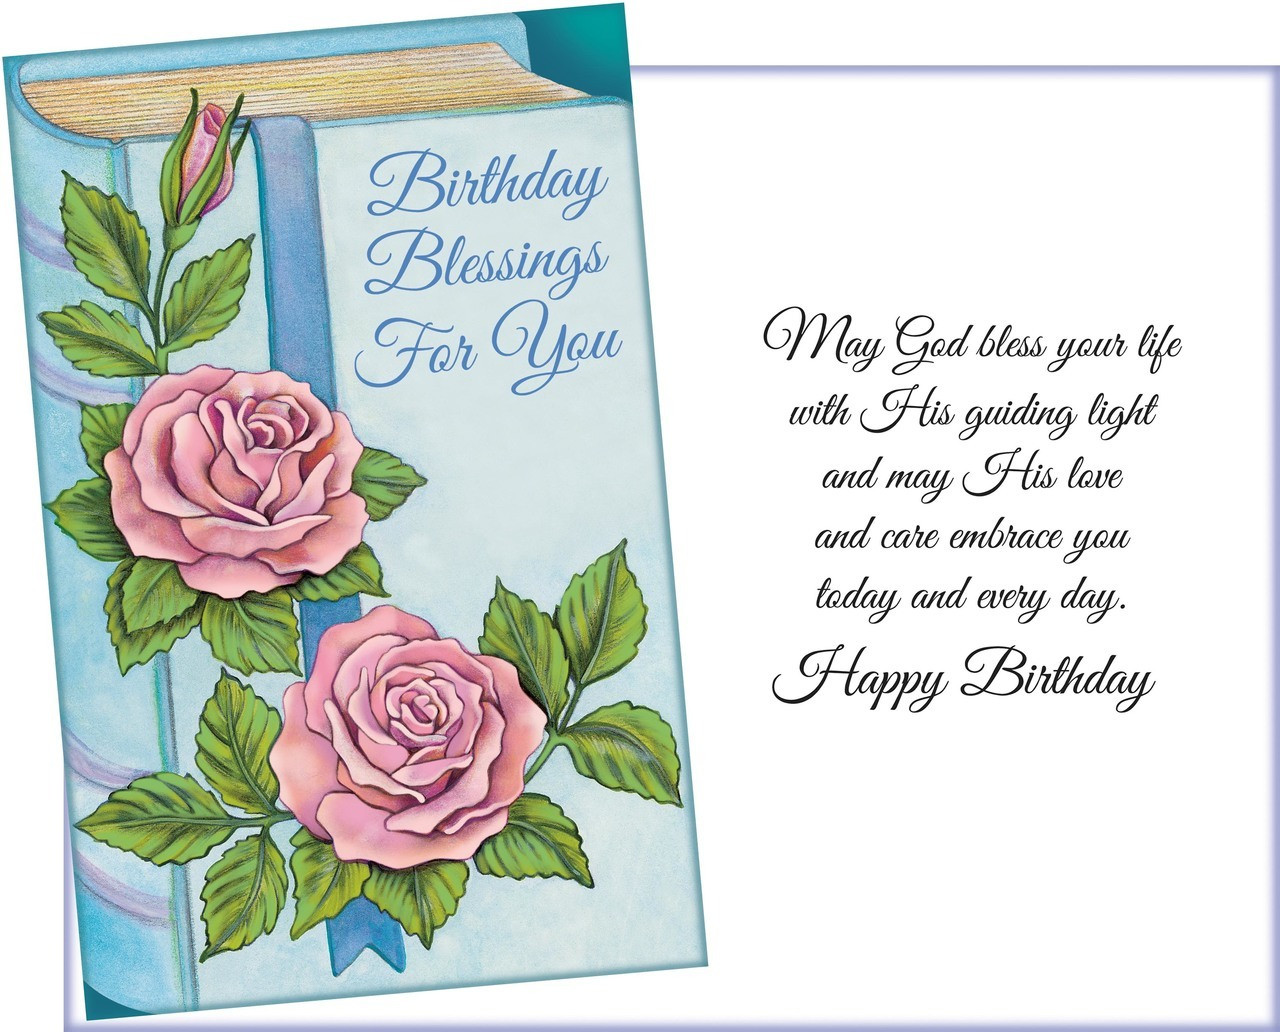 Religious Birthday Cards
 six religious birthday greeting cards with six